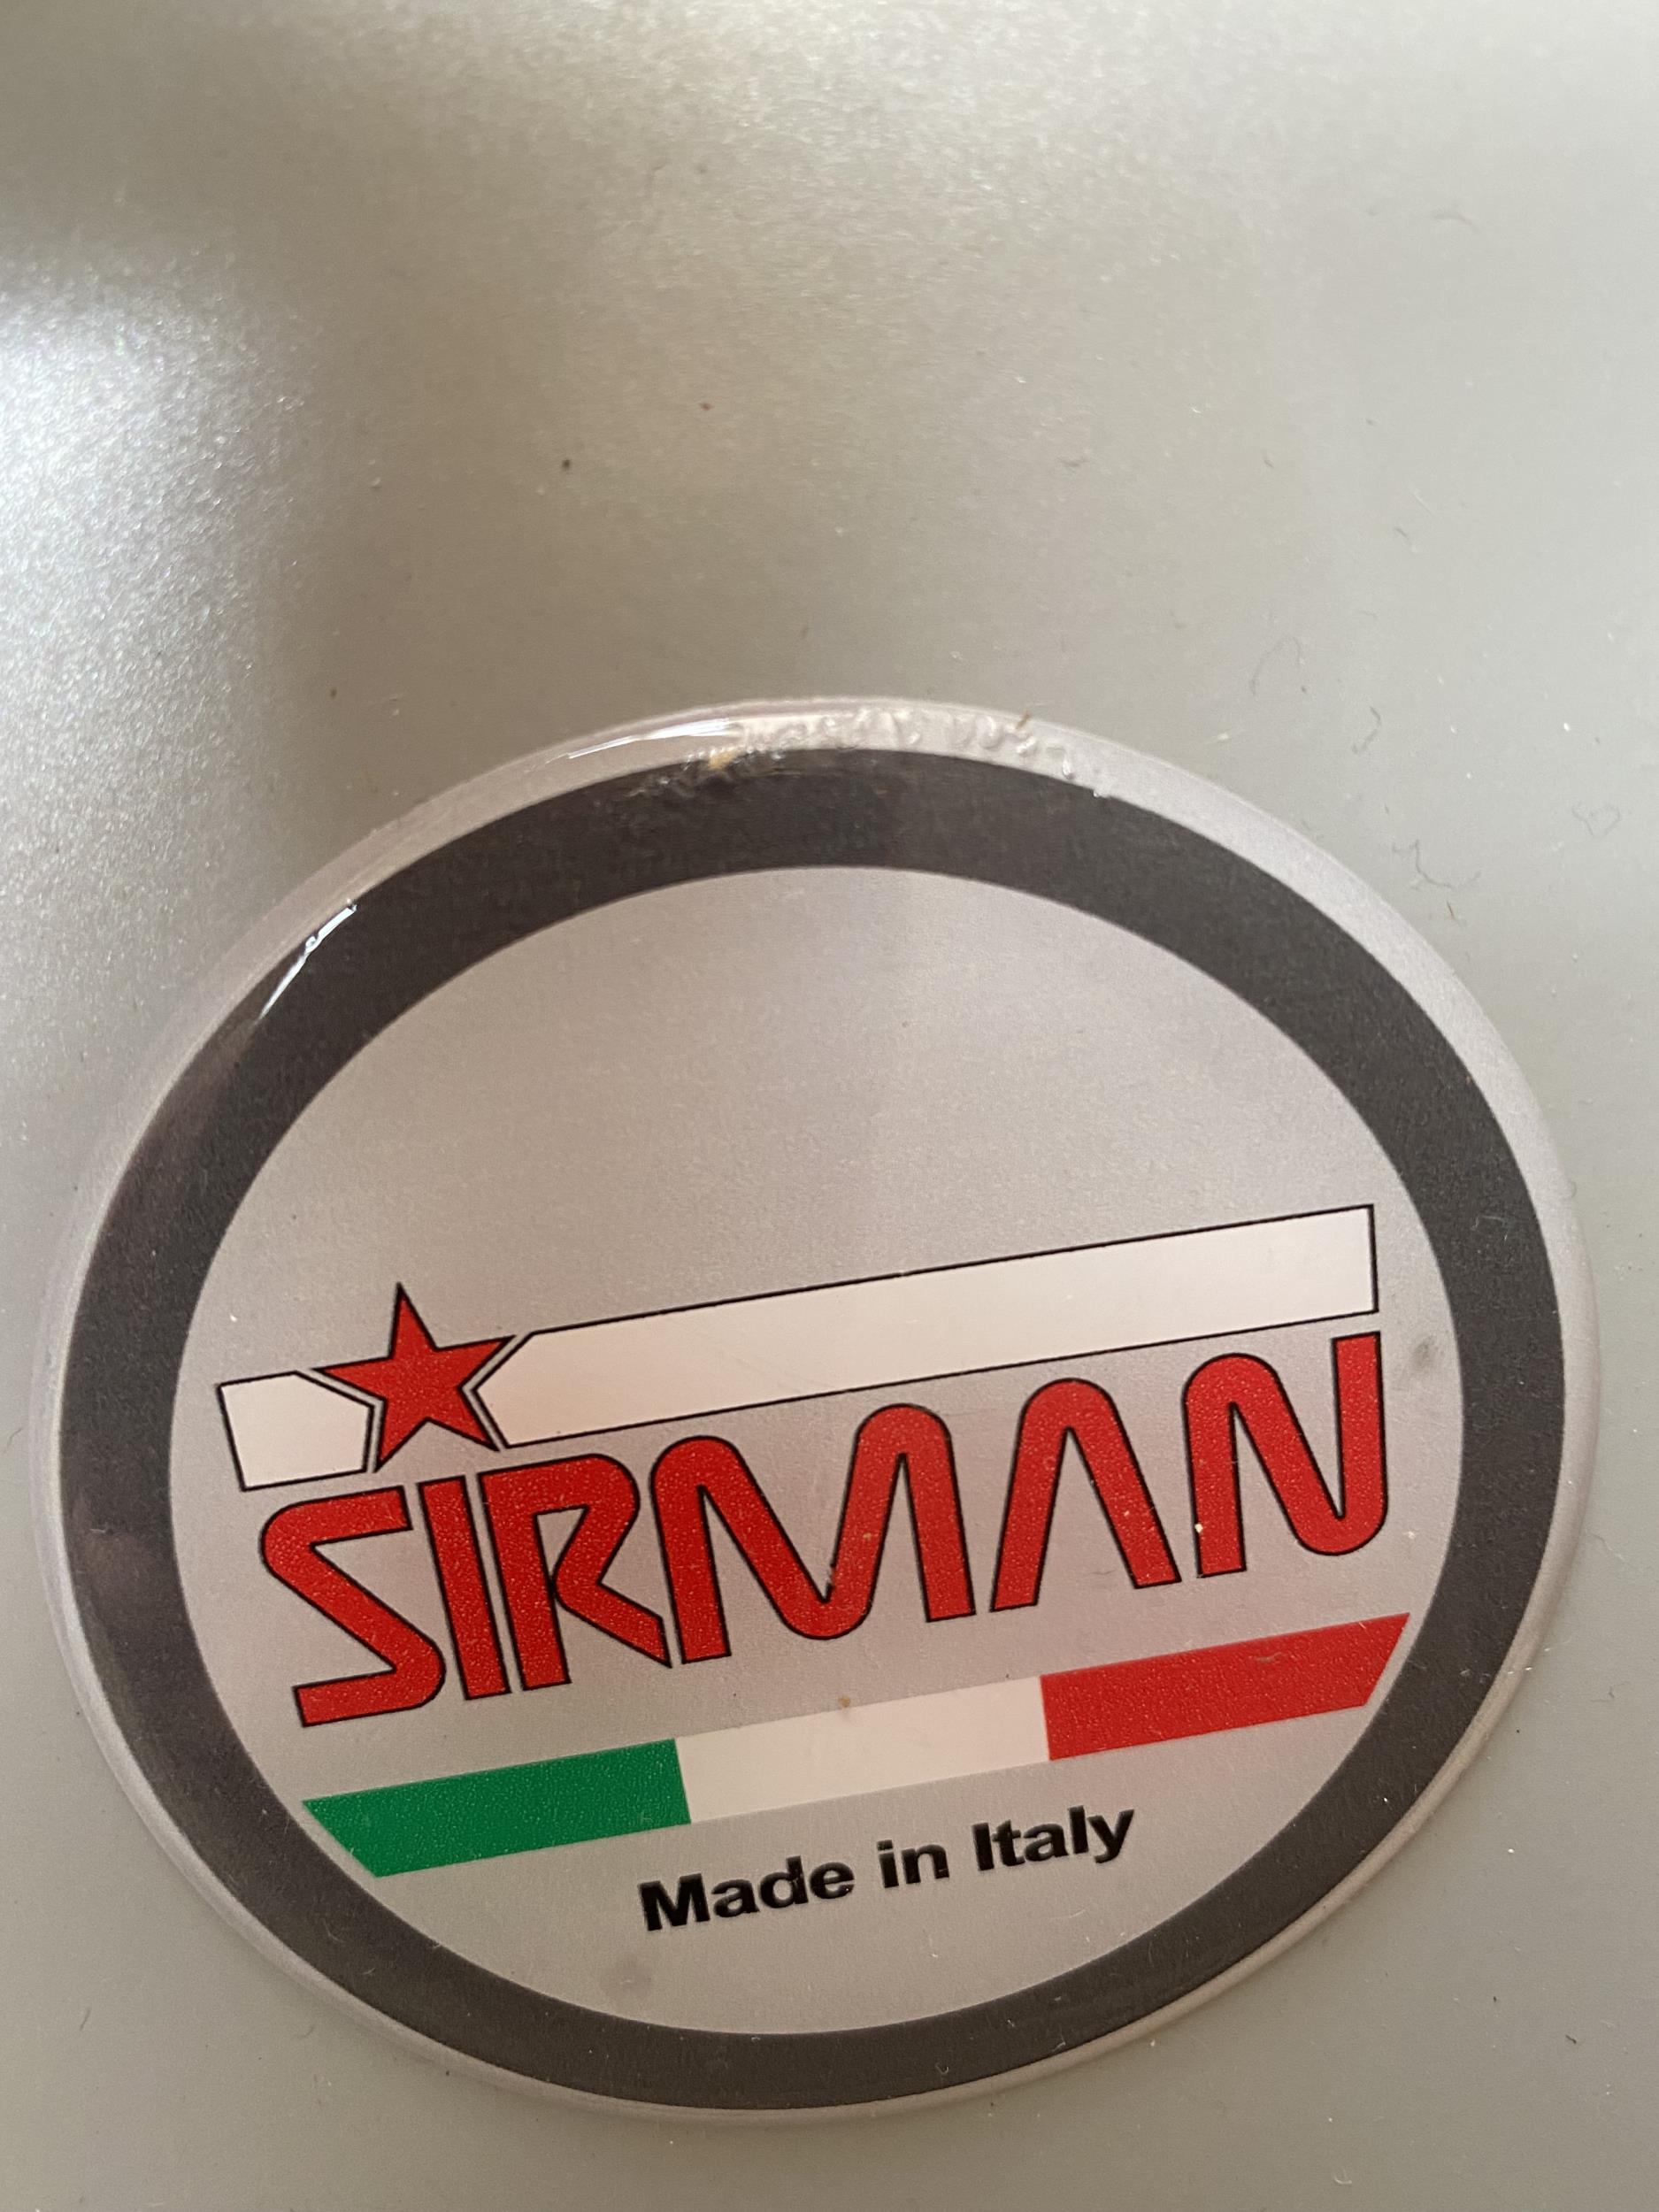 AN AS NEW SIRMAN ELECTRIC MEAT SLICER - Image 2 of 2